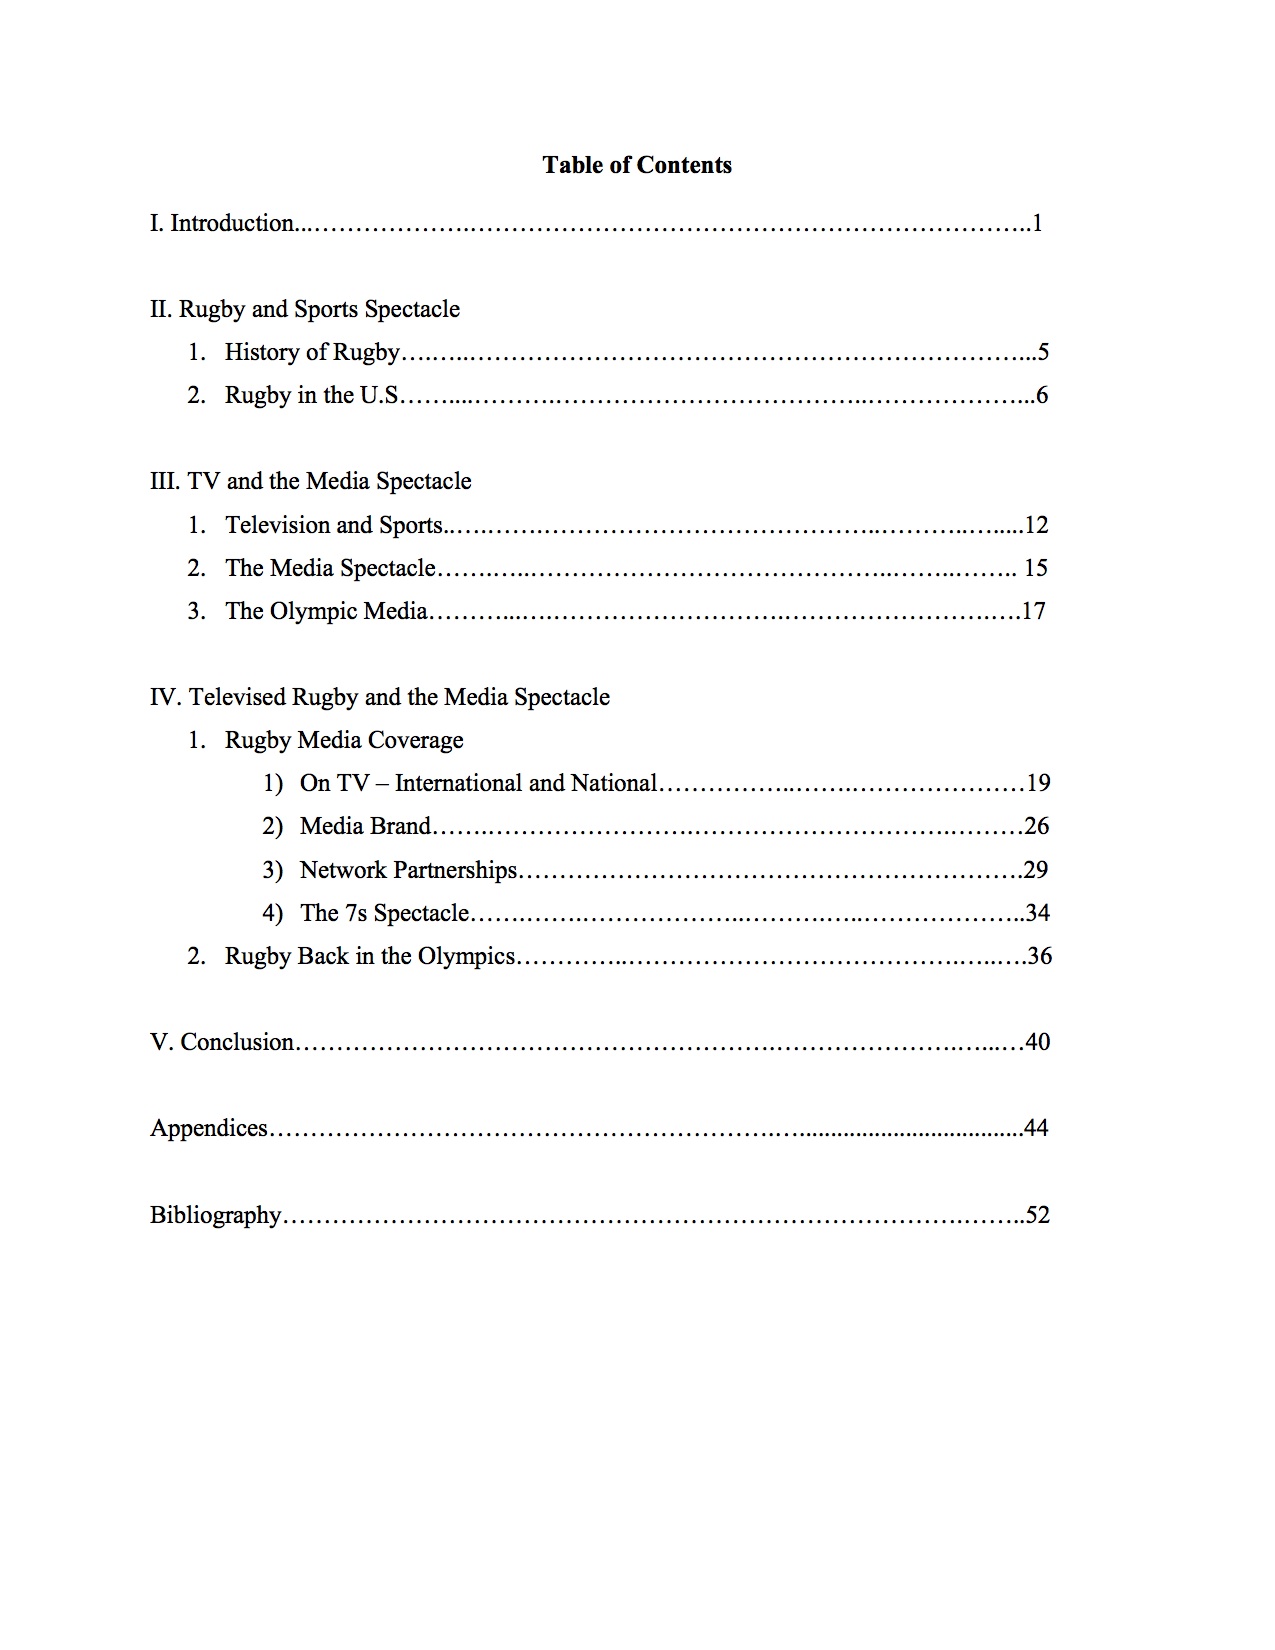 Essay table of contents